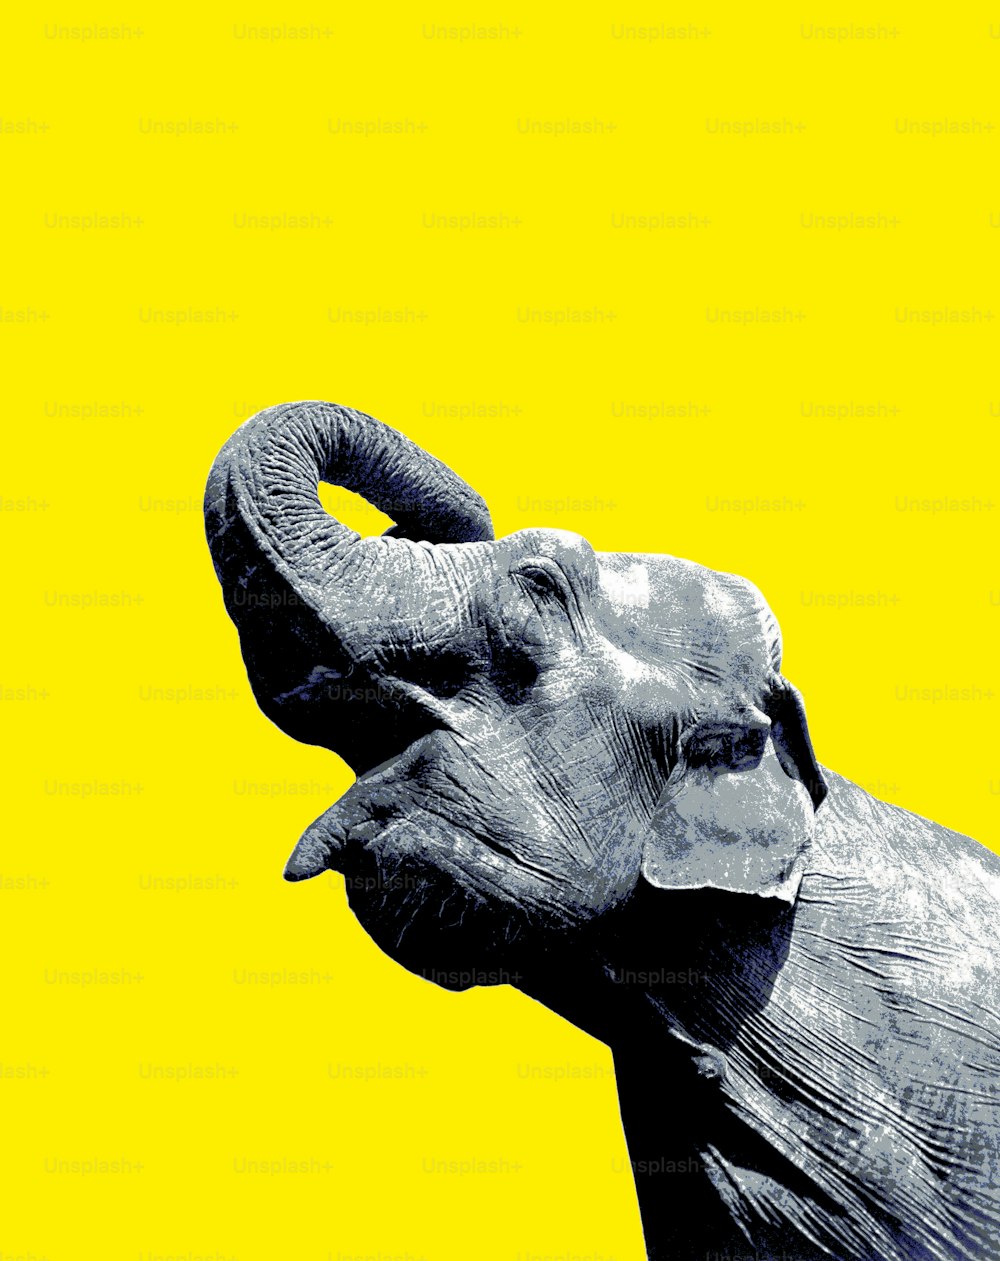 a black and white photo of an elephant on a yellow background